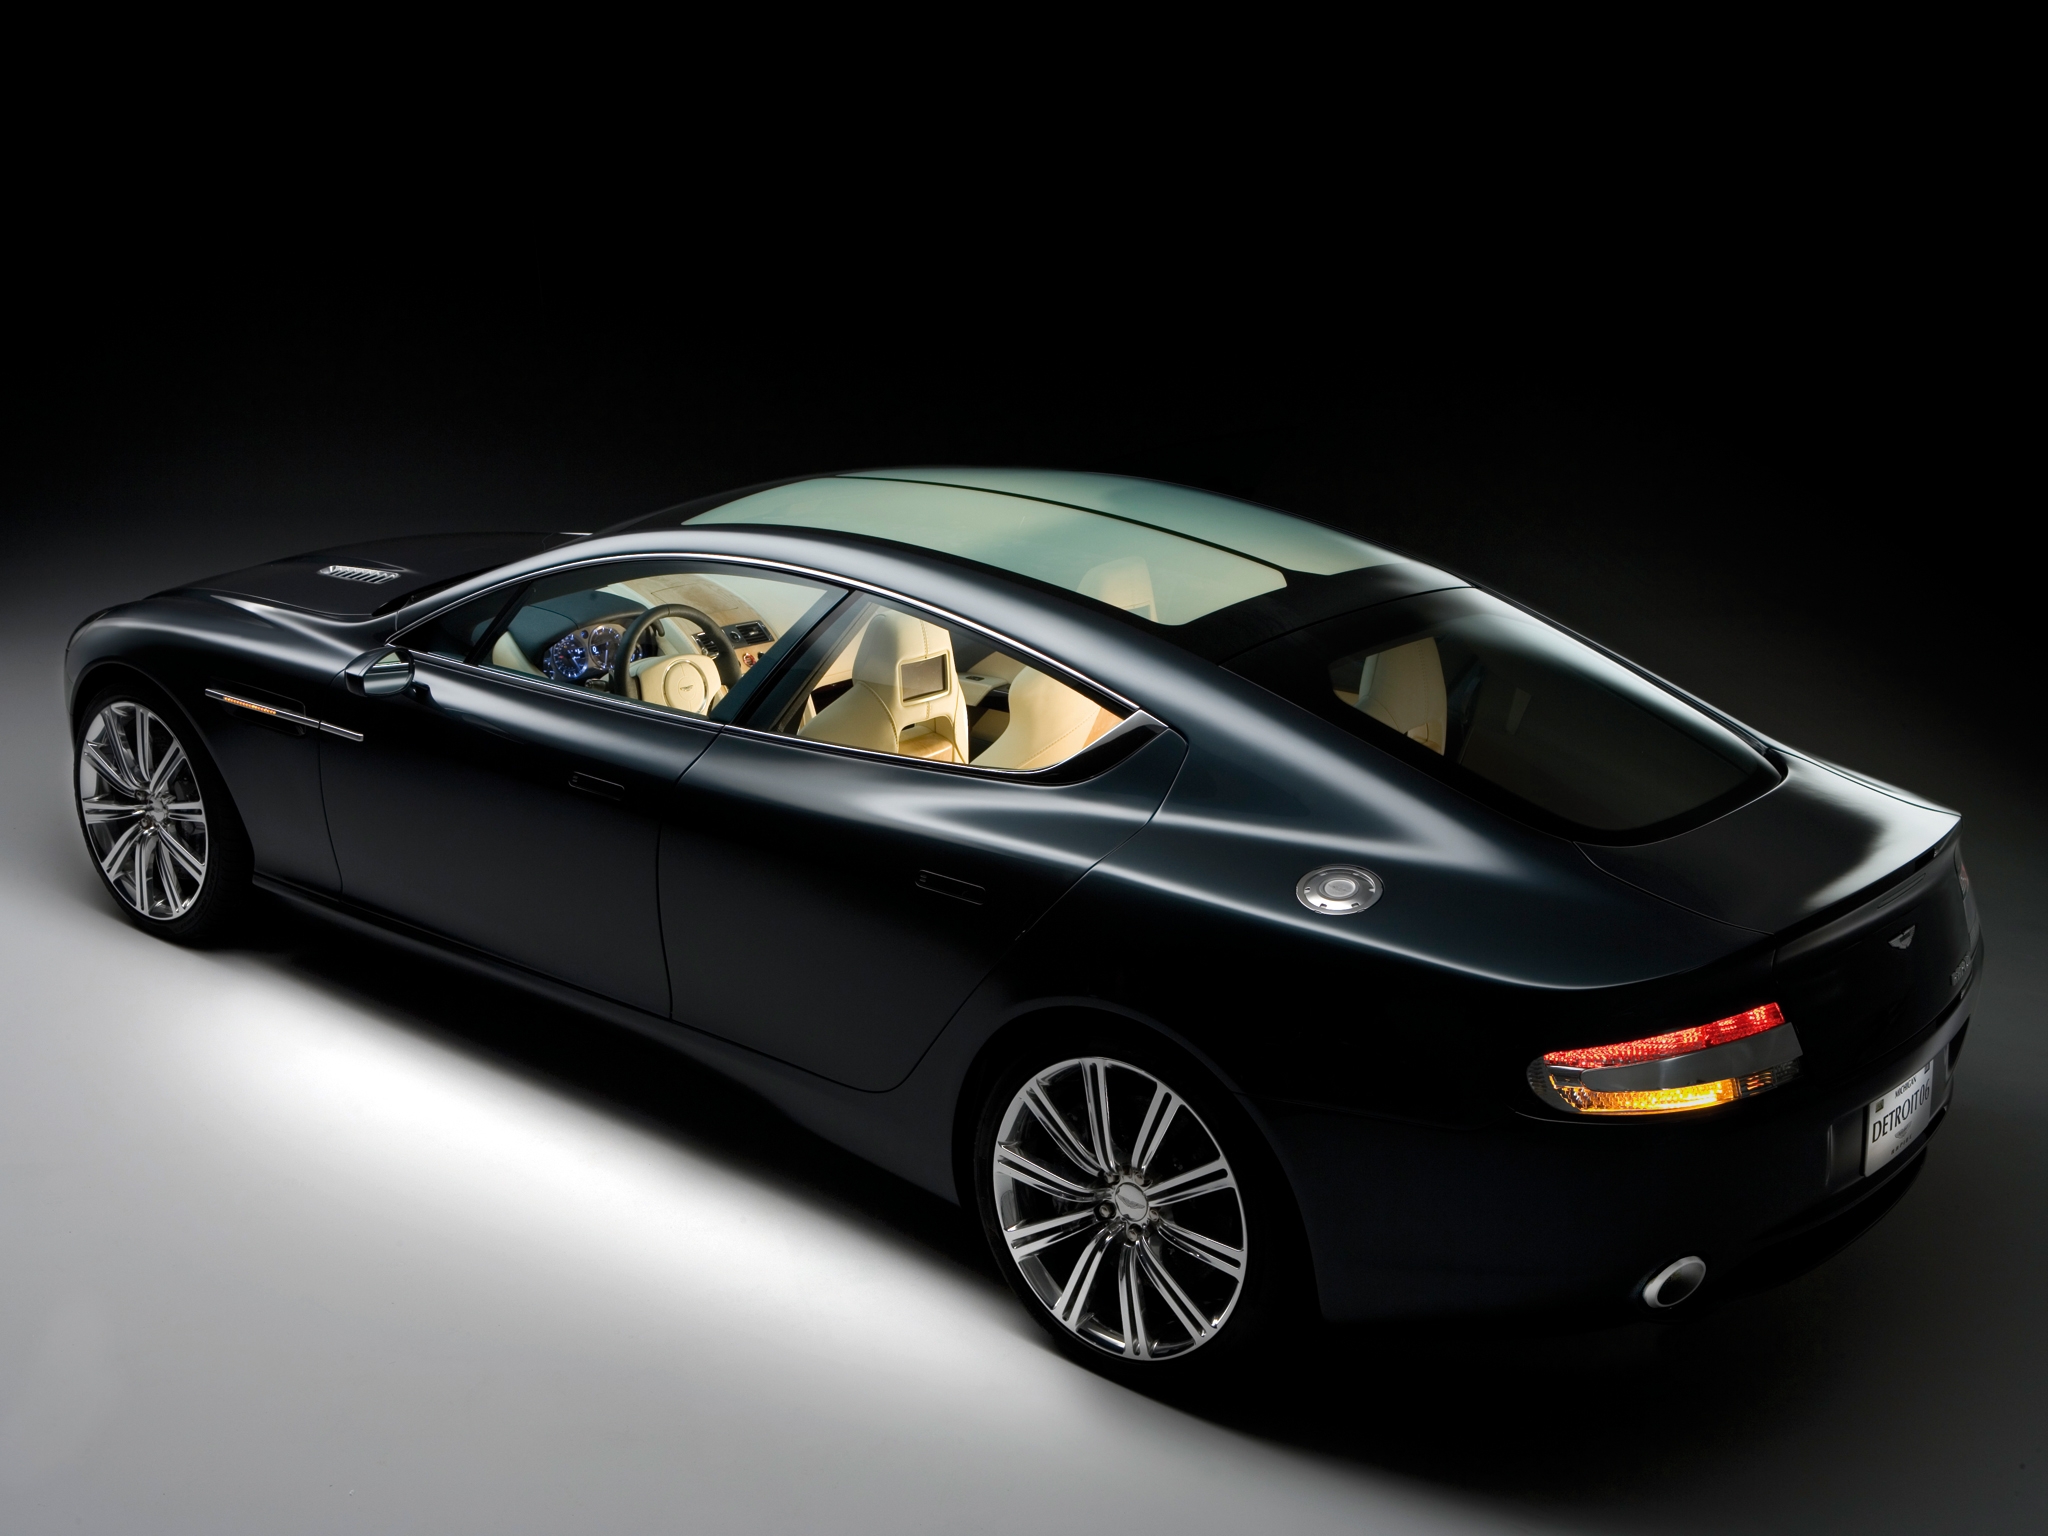 aston martin, cars, black, side view, style, concept car, 2006, rapide